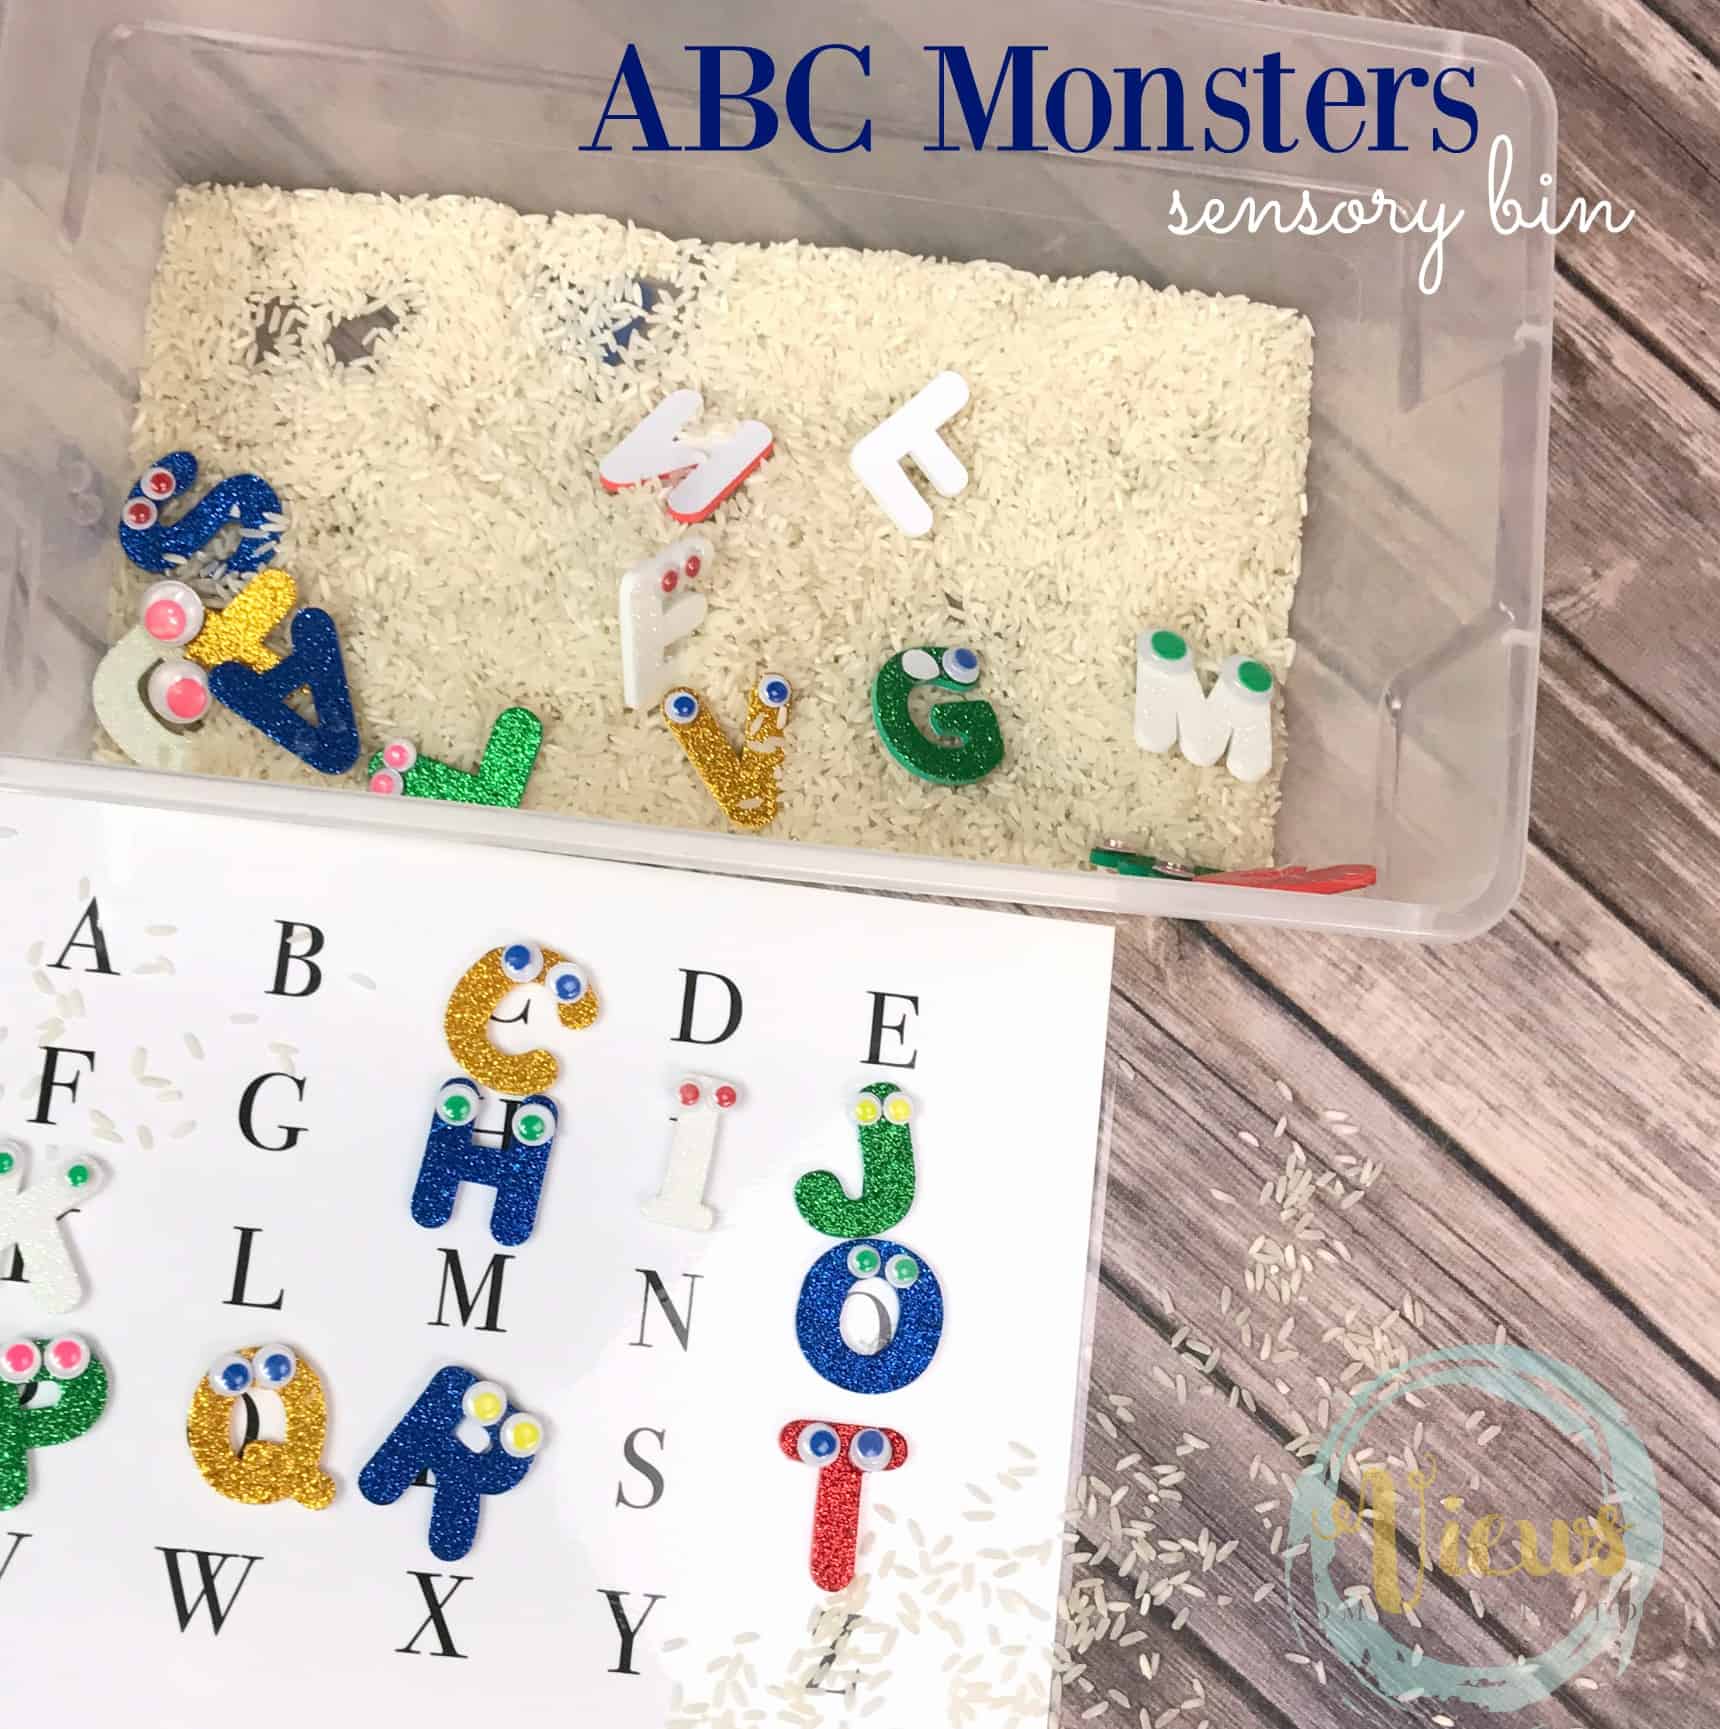 This ABC Monsters sensory bin incorporates some homemade letter monsters and the lovable kids' show, the ABC Monsters! Learn letters through play! 